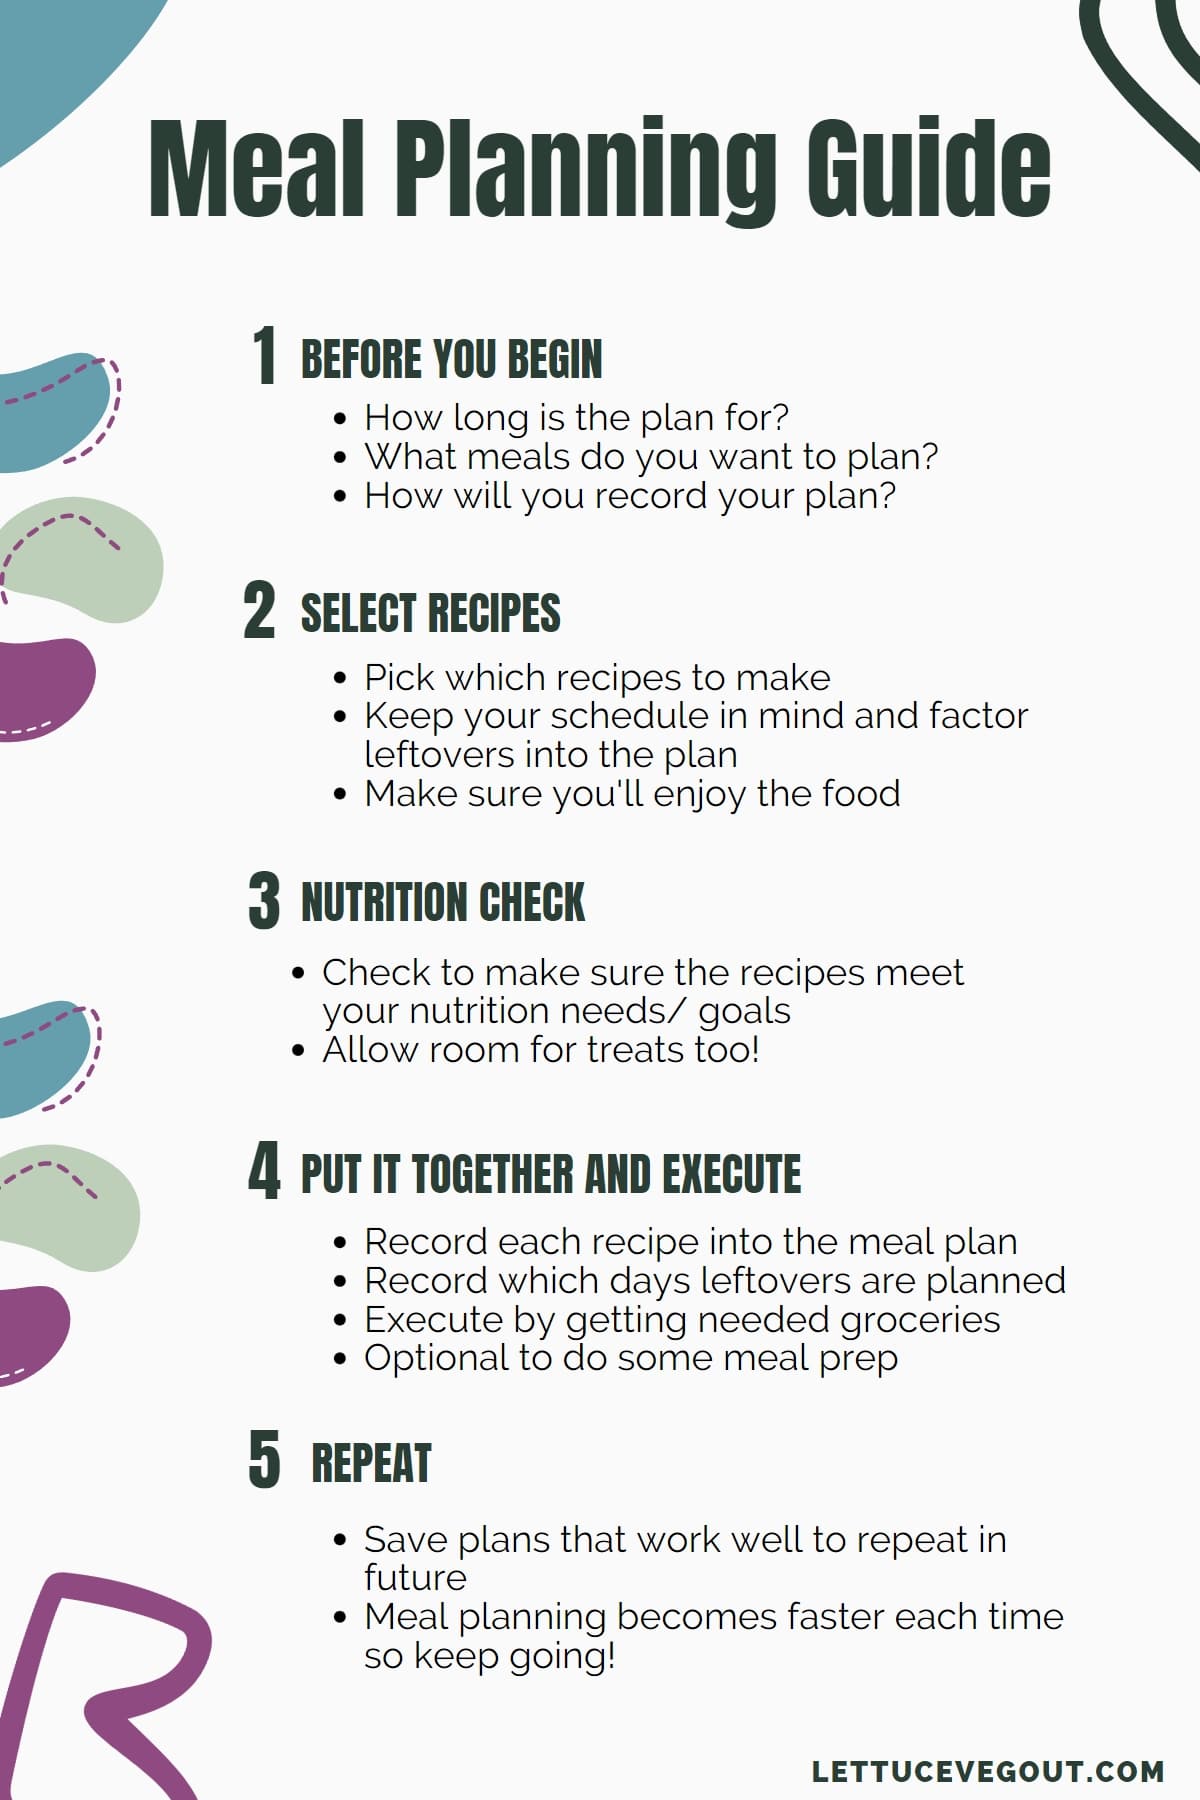 Infographic outlining 5 steps for meal planning (before you begin, select recipes, nutrition check, put it together and execute, repeat).